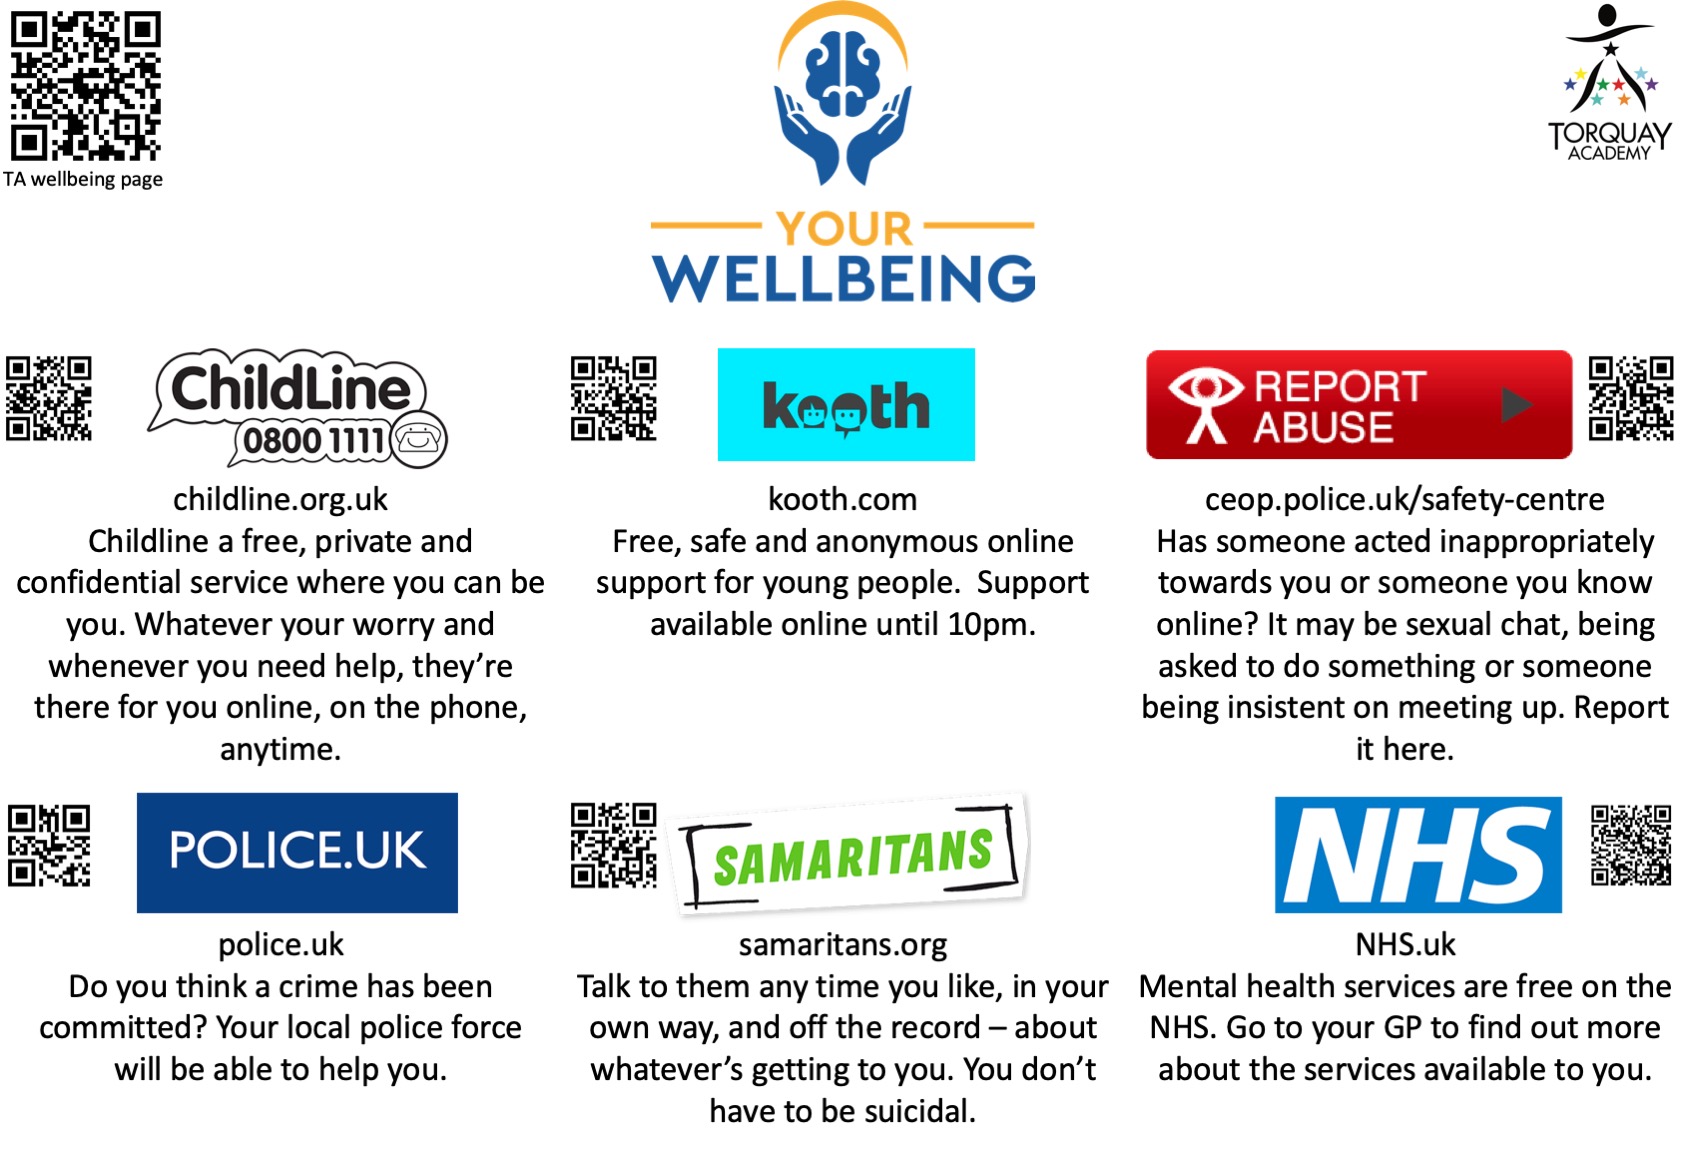 Your wellbeing poster